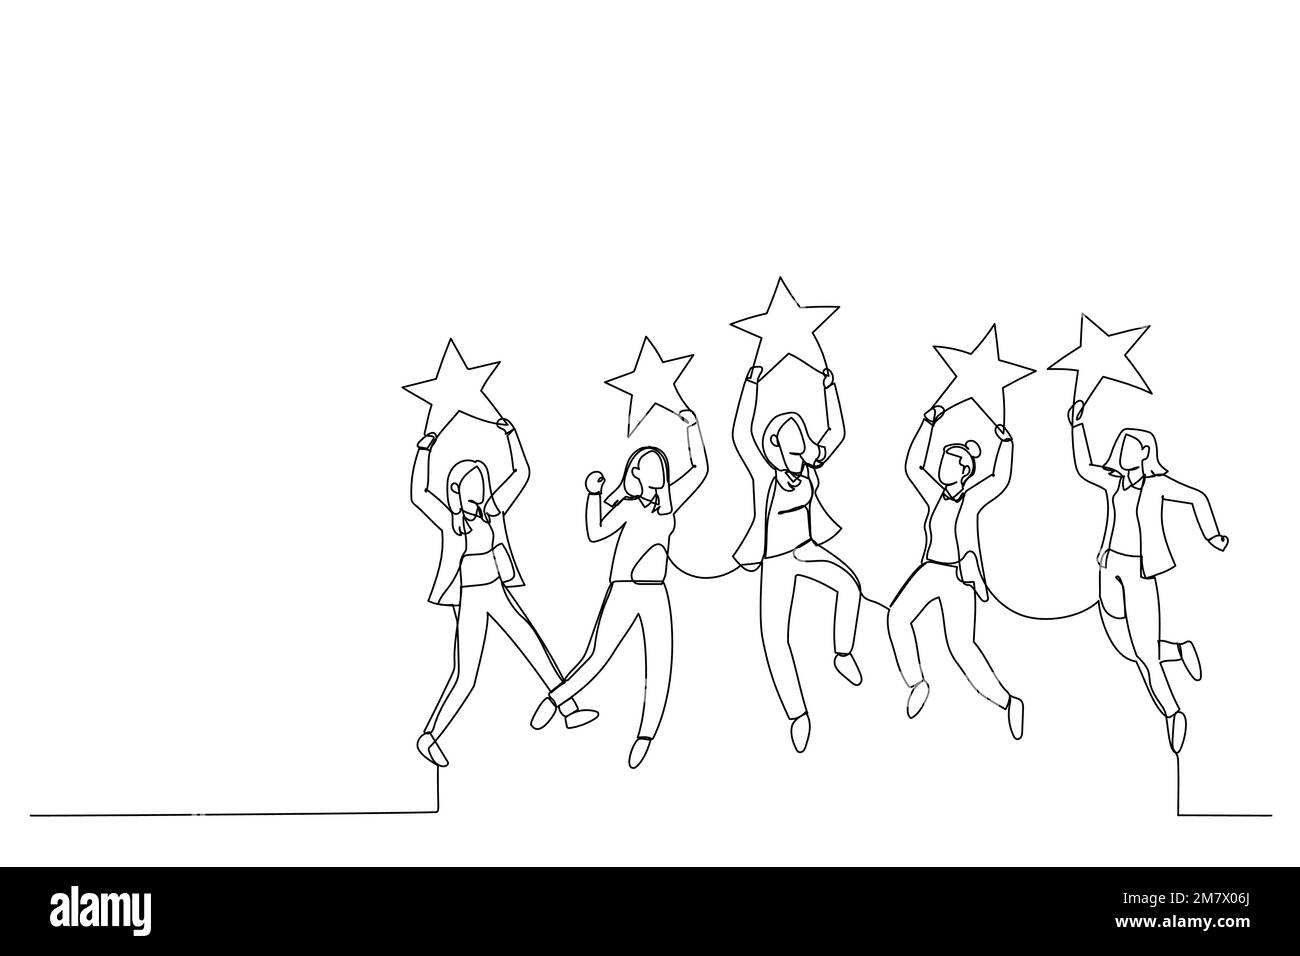 Drawing of businesswoman jumping and holding golden review stars. Metaphor for business rating. Single line art style Stock Vector